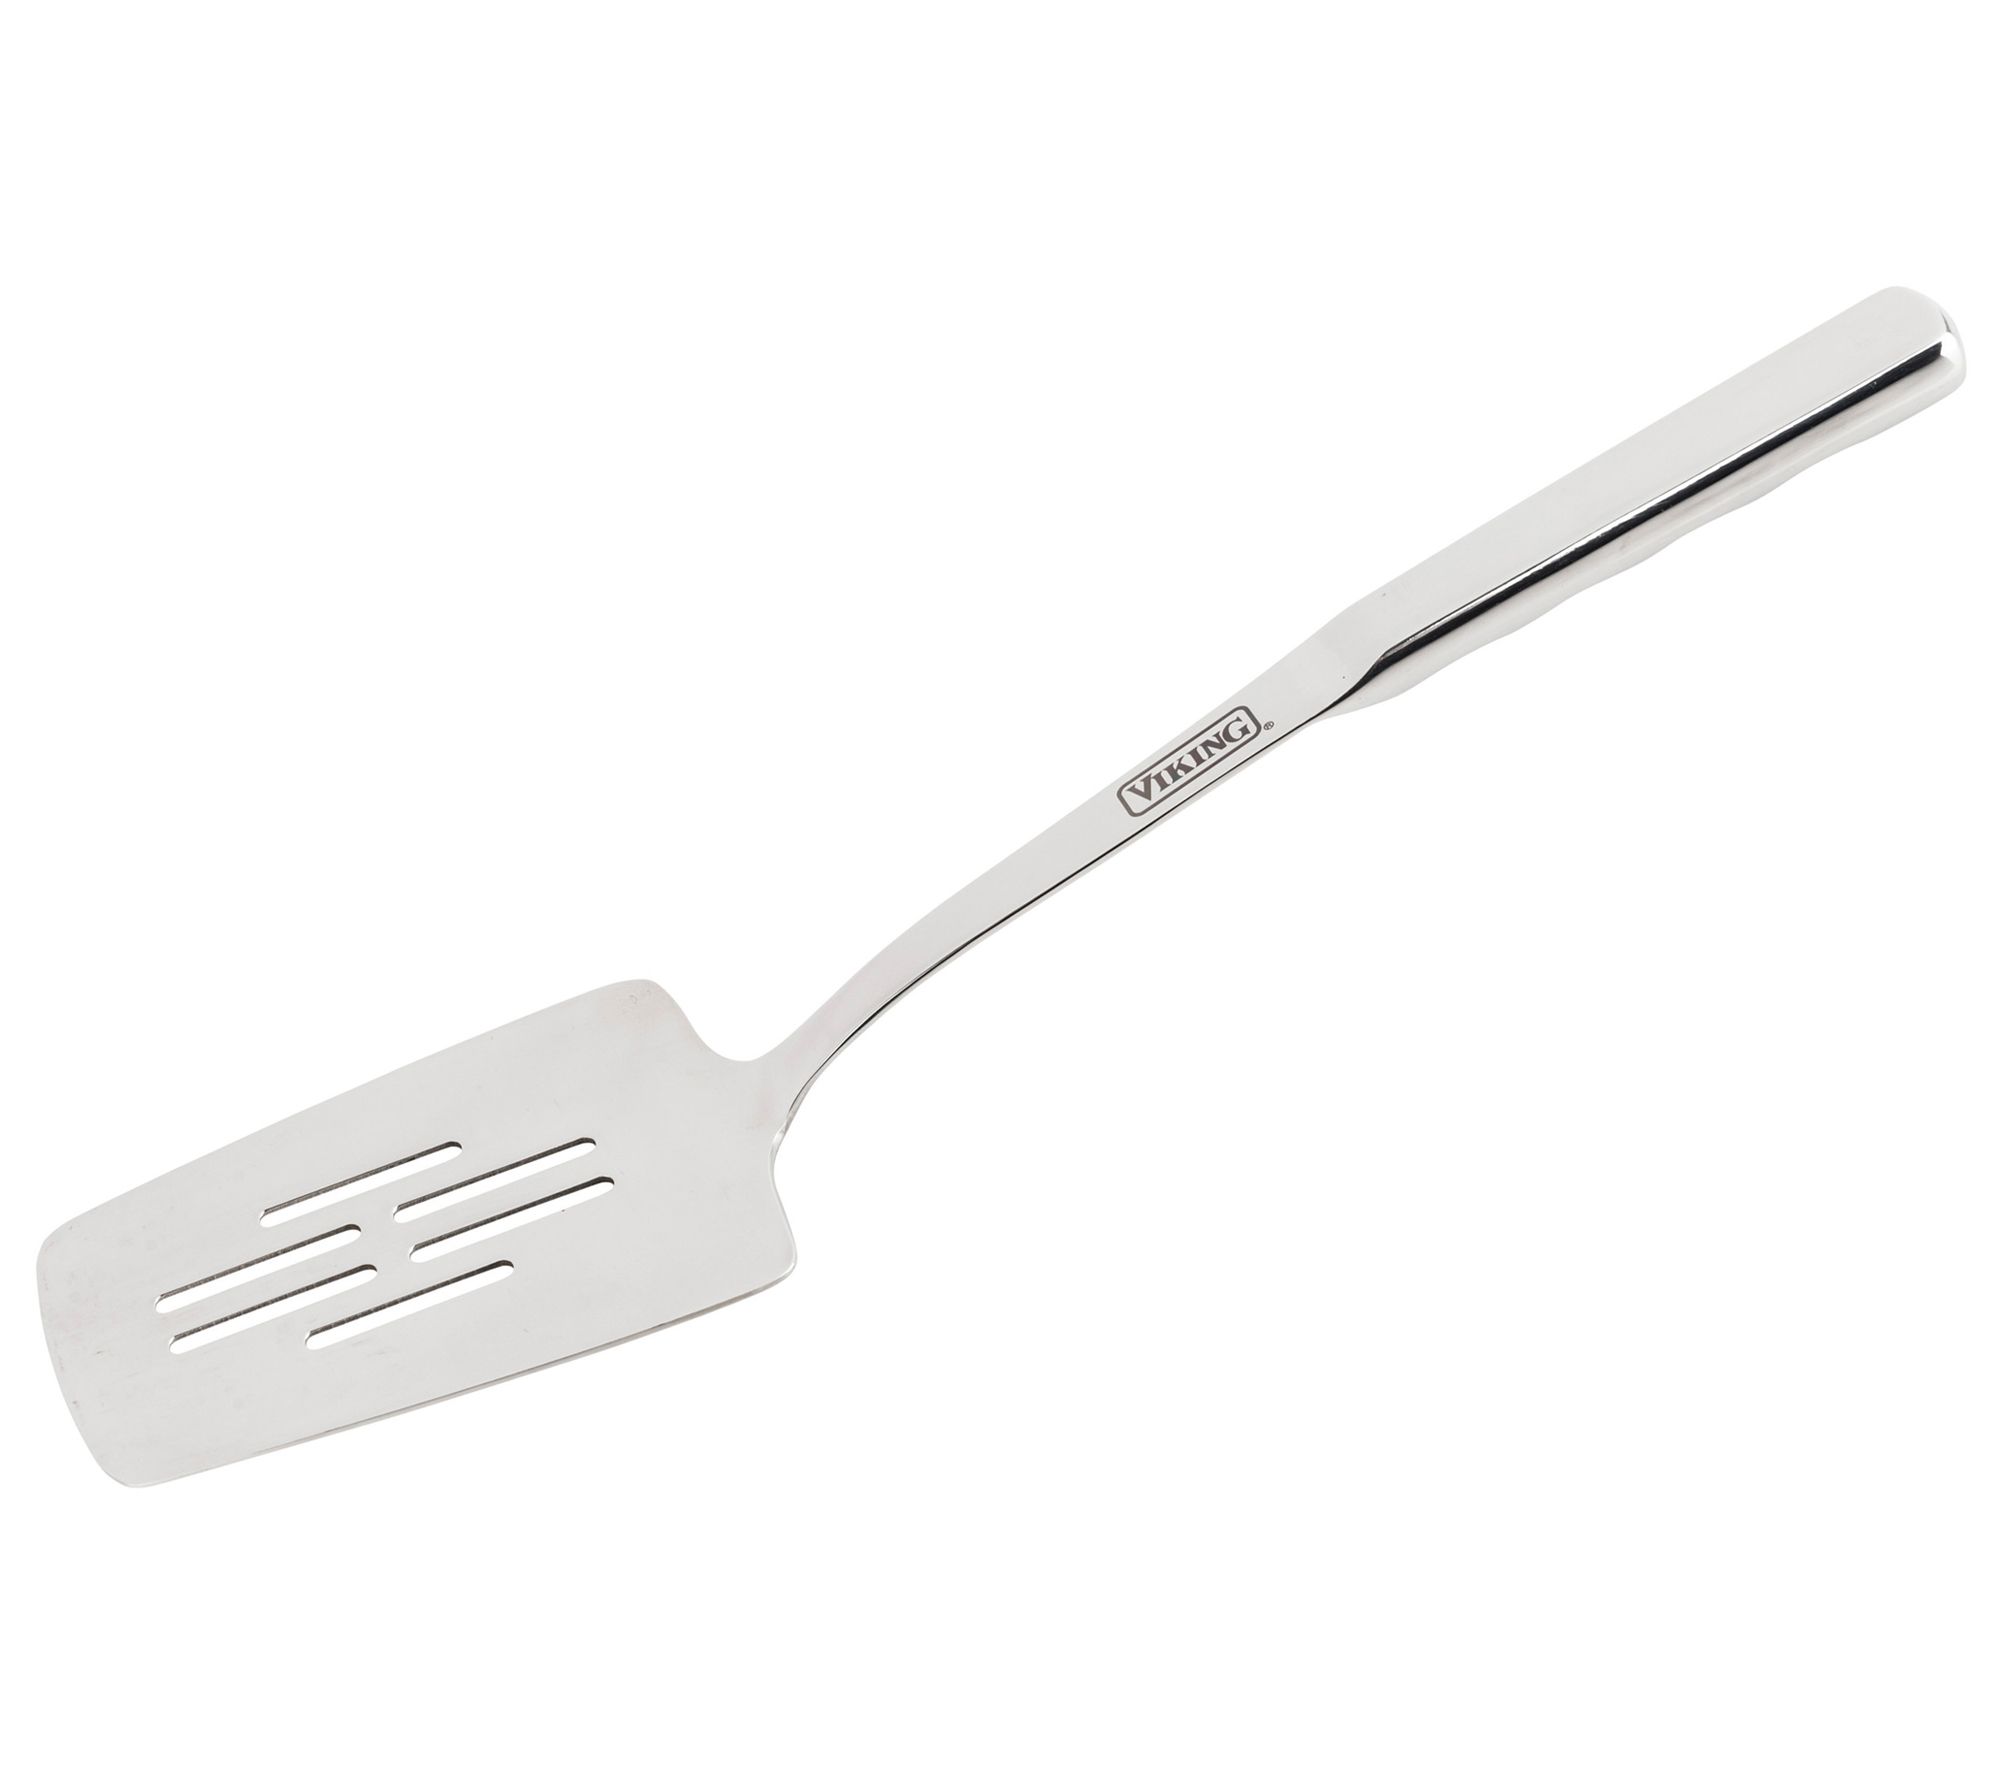 Viking Stainless Steel Slotted Spatula